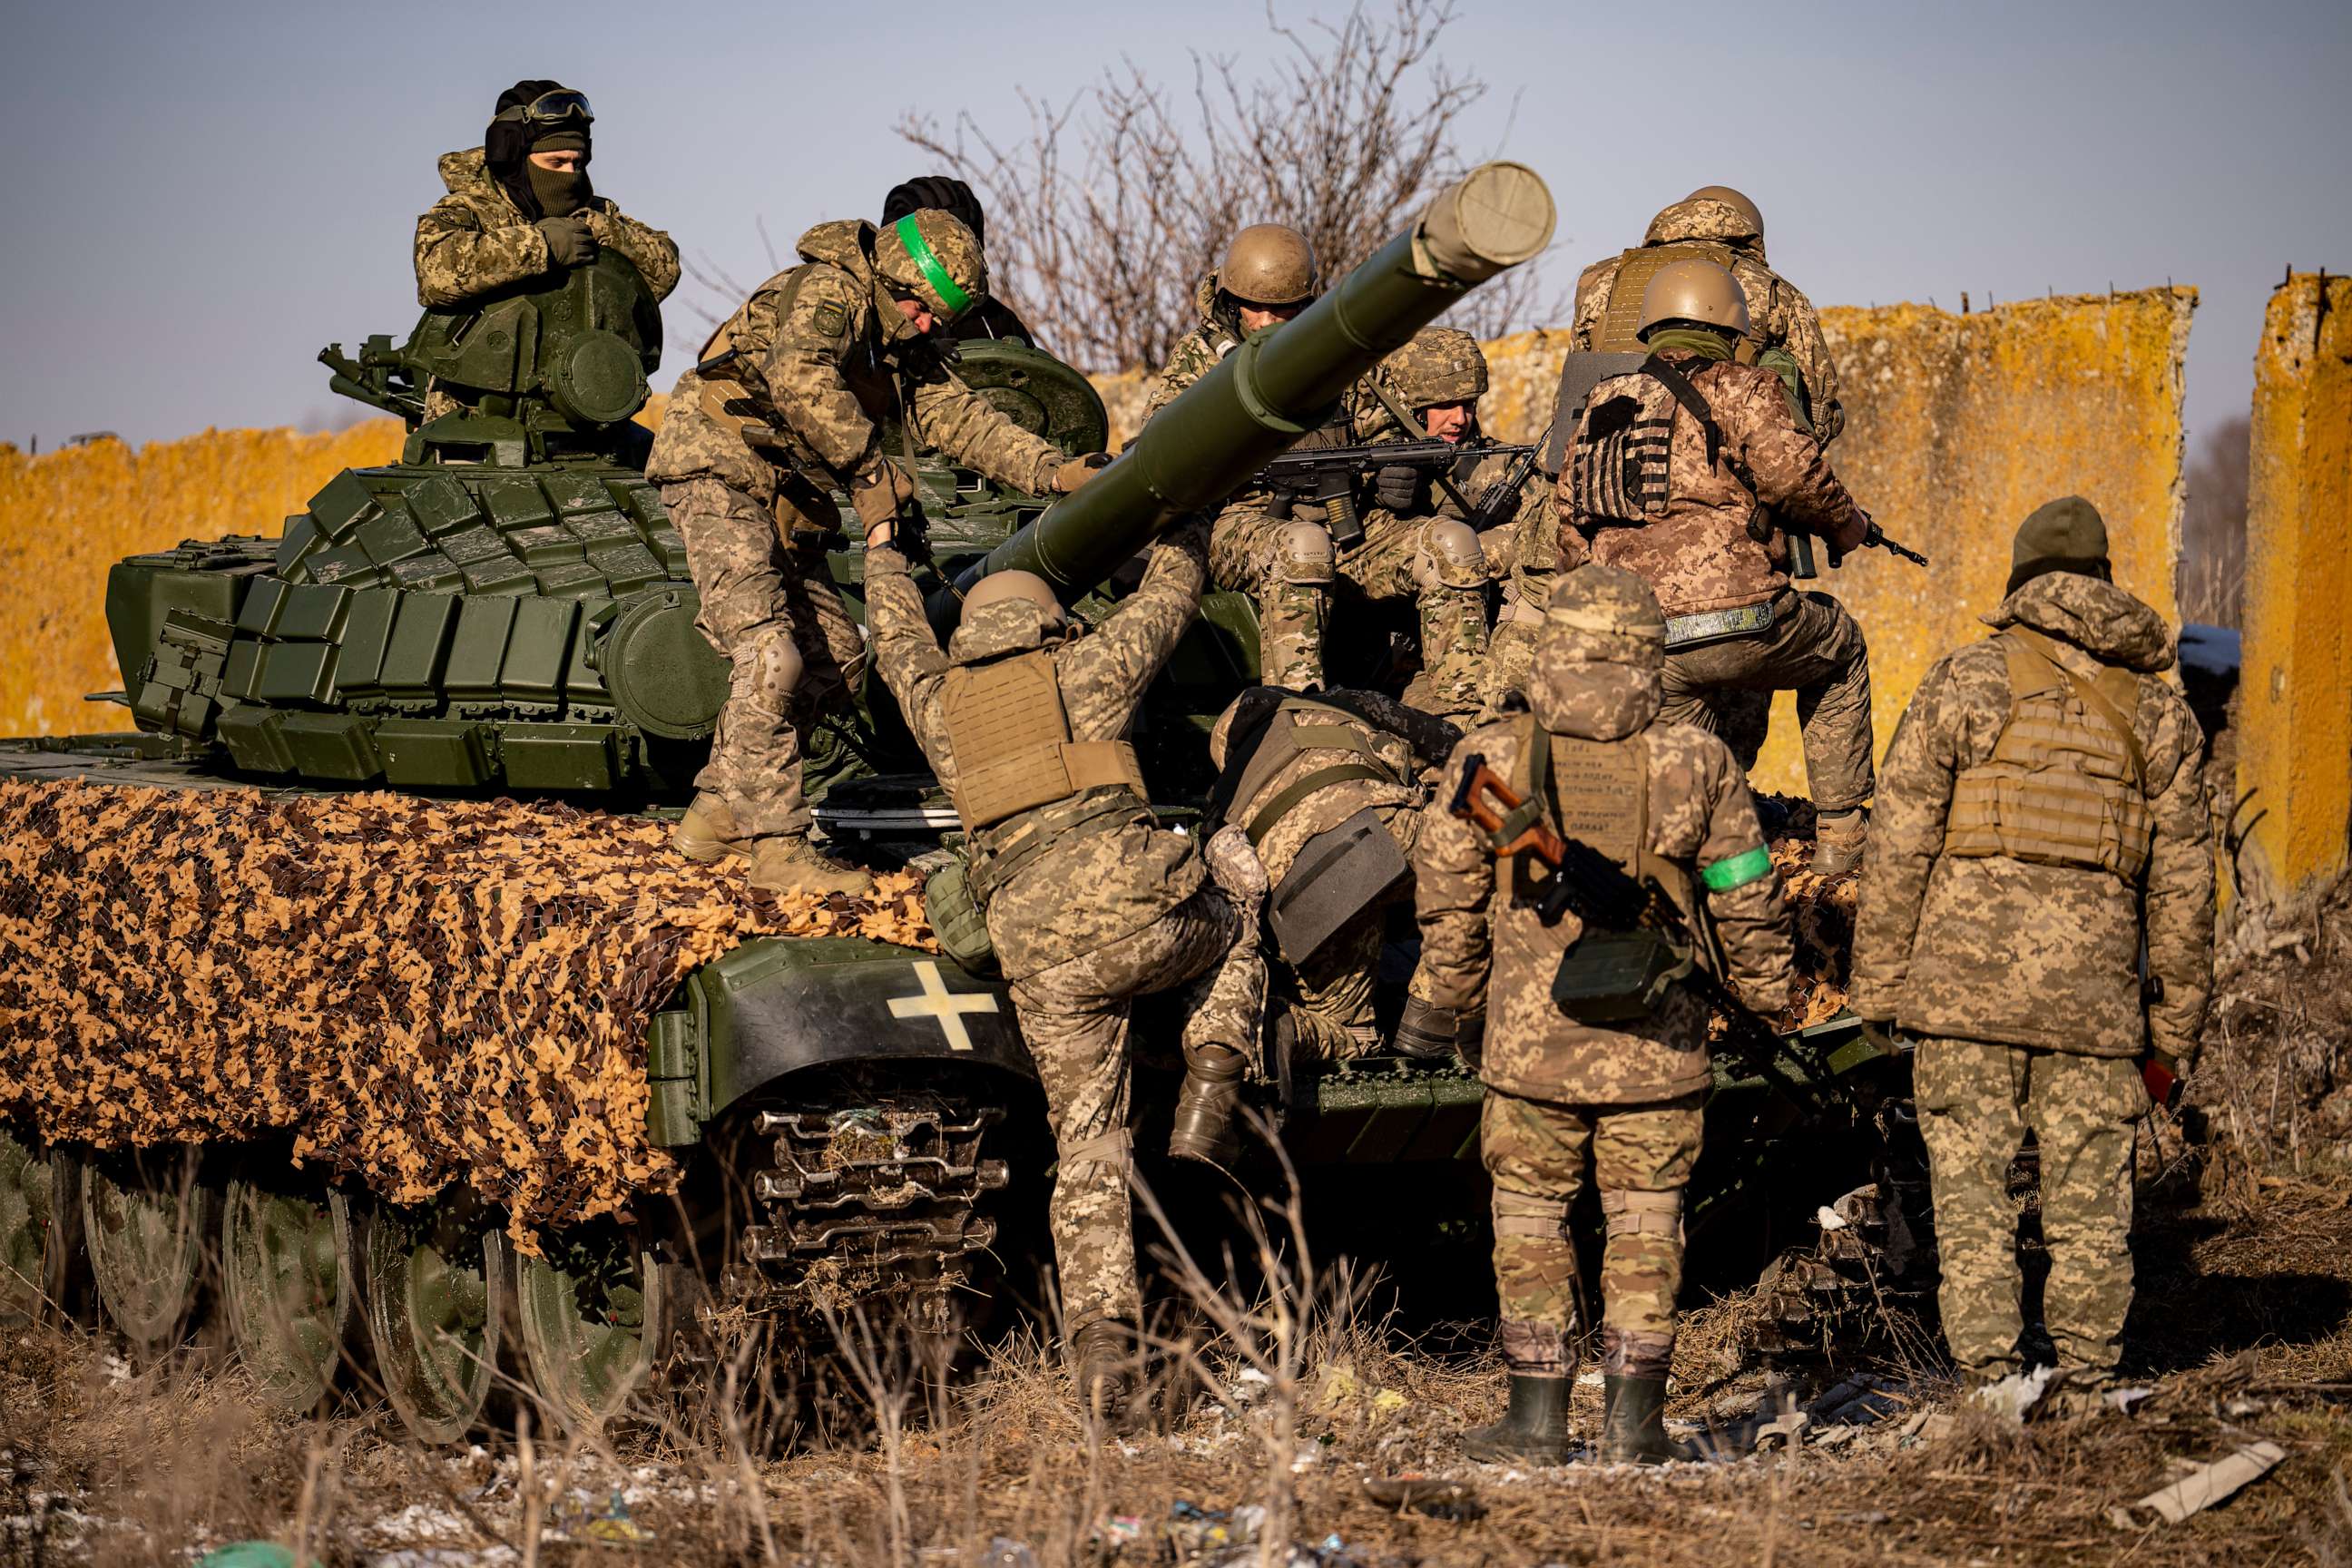 PHOTO: Ukrainian servicemen of the 3rd Separate Tank Iron Brigde take part in an exercise in the Kharkiv area, Ukraine, Thursday, Feb. 23, 2023, the day before the one year mark since the war began.